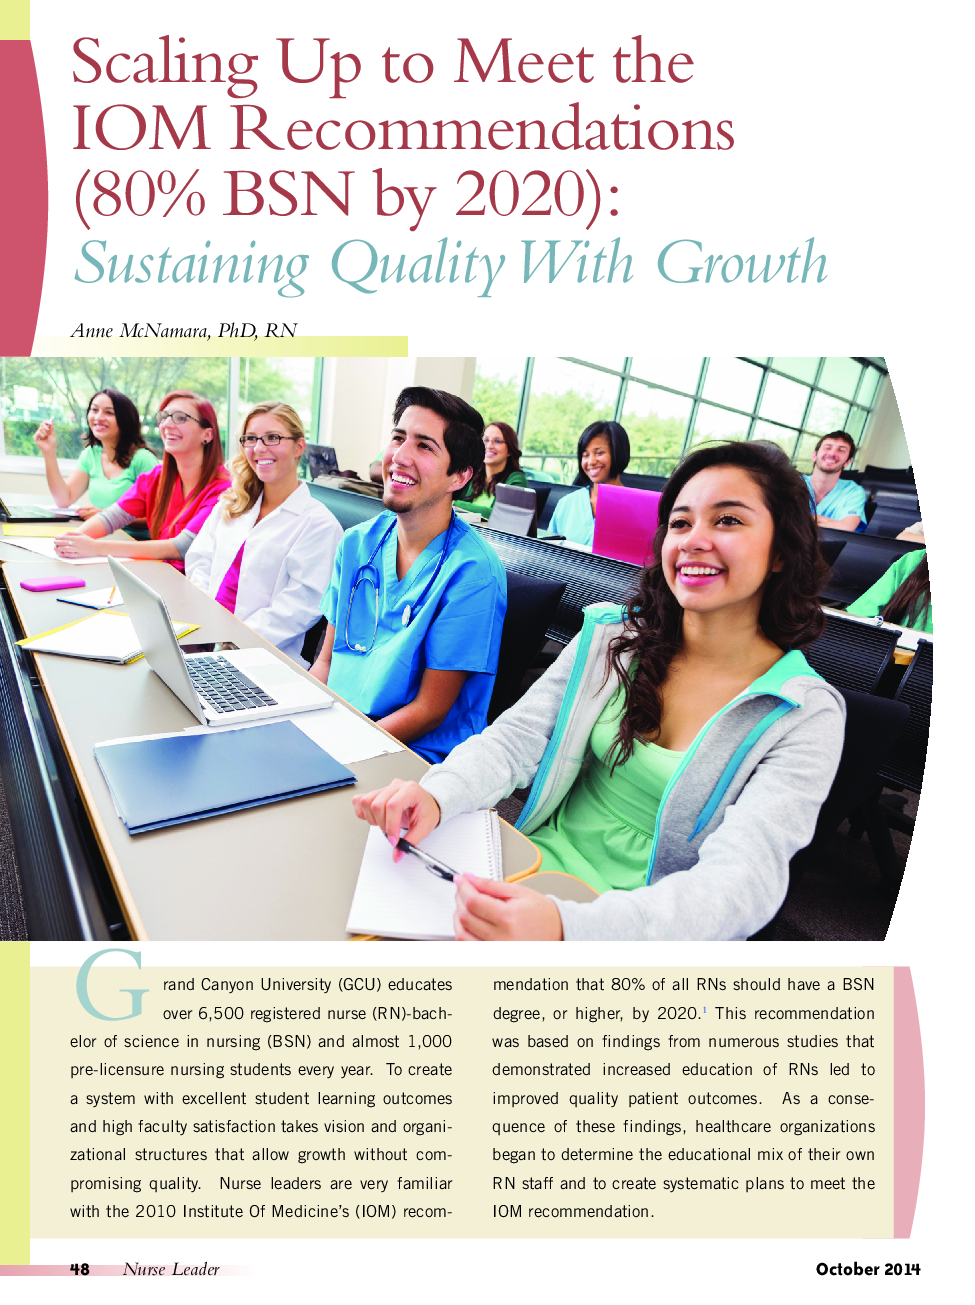 Scaling Up to Meet the IOM Recommendations (80% BSN by 2020): Sustaining Quality With Growth